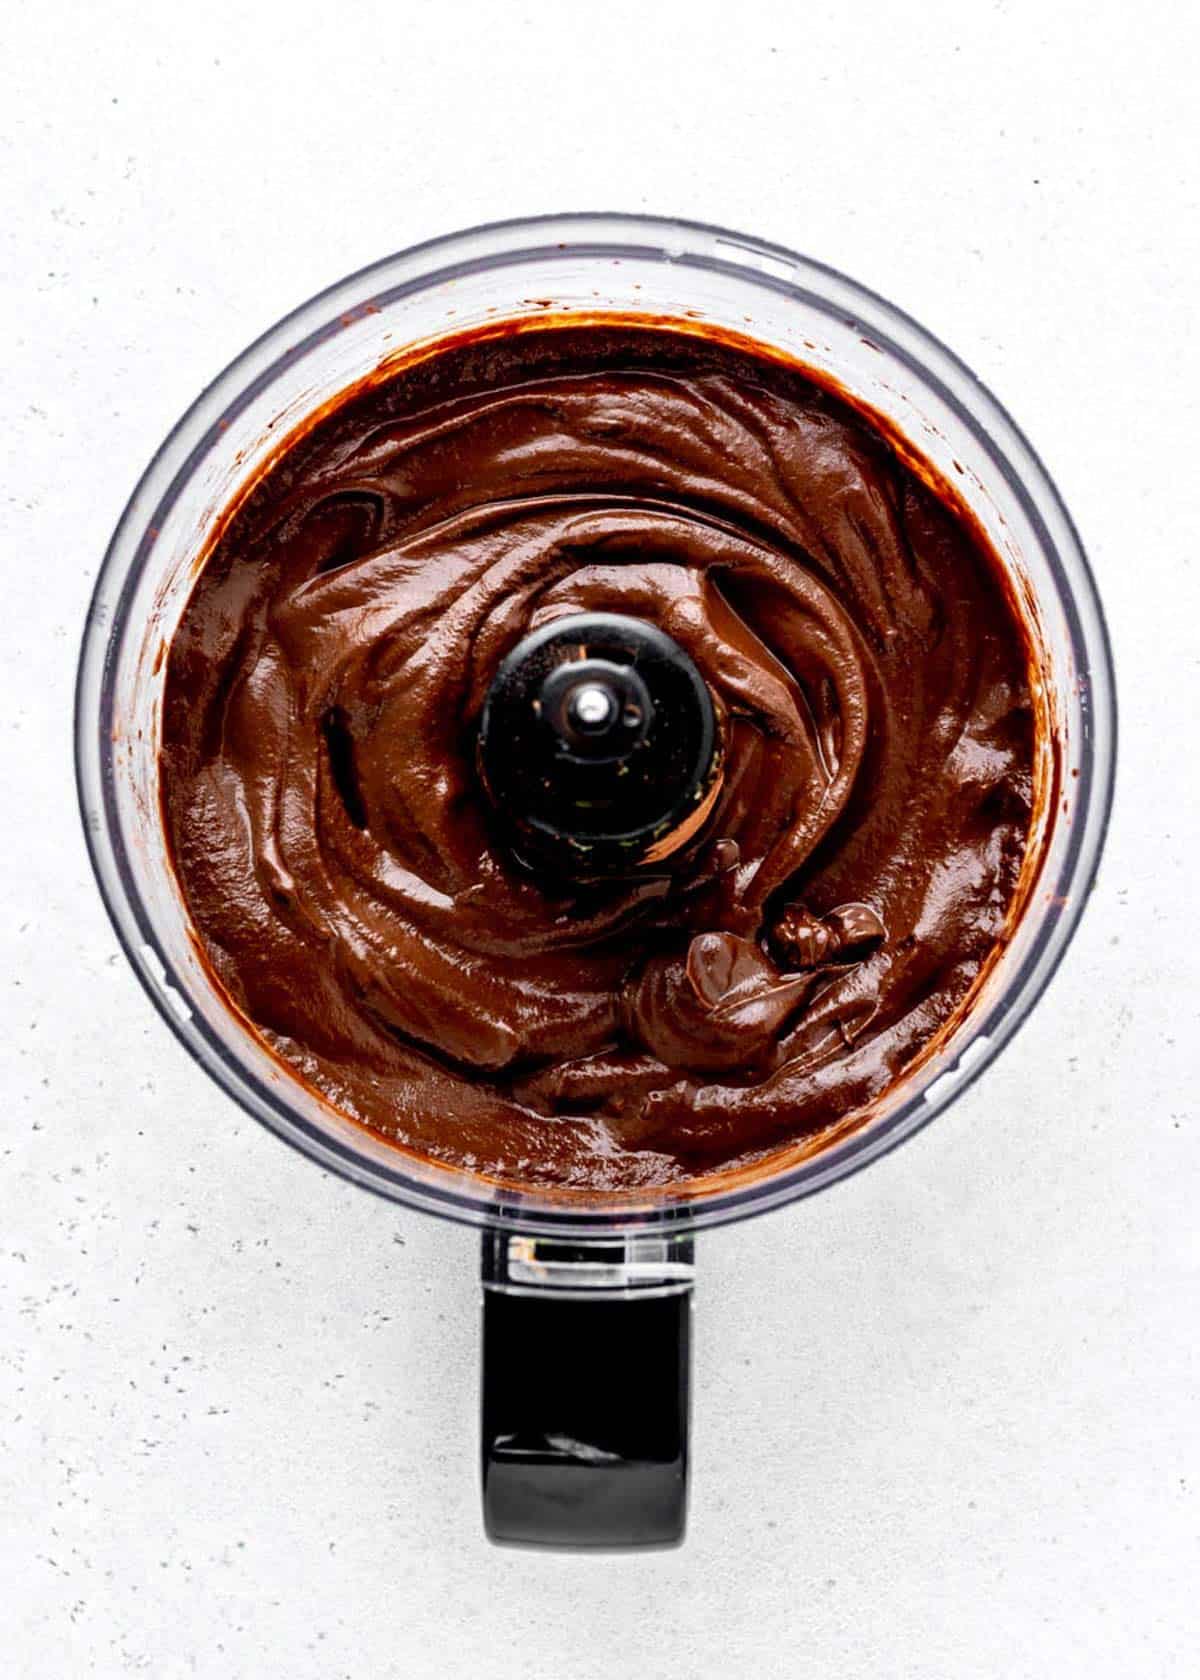 Chocolate avocado pudding blended in a food processor.